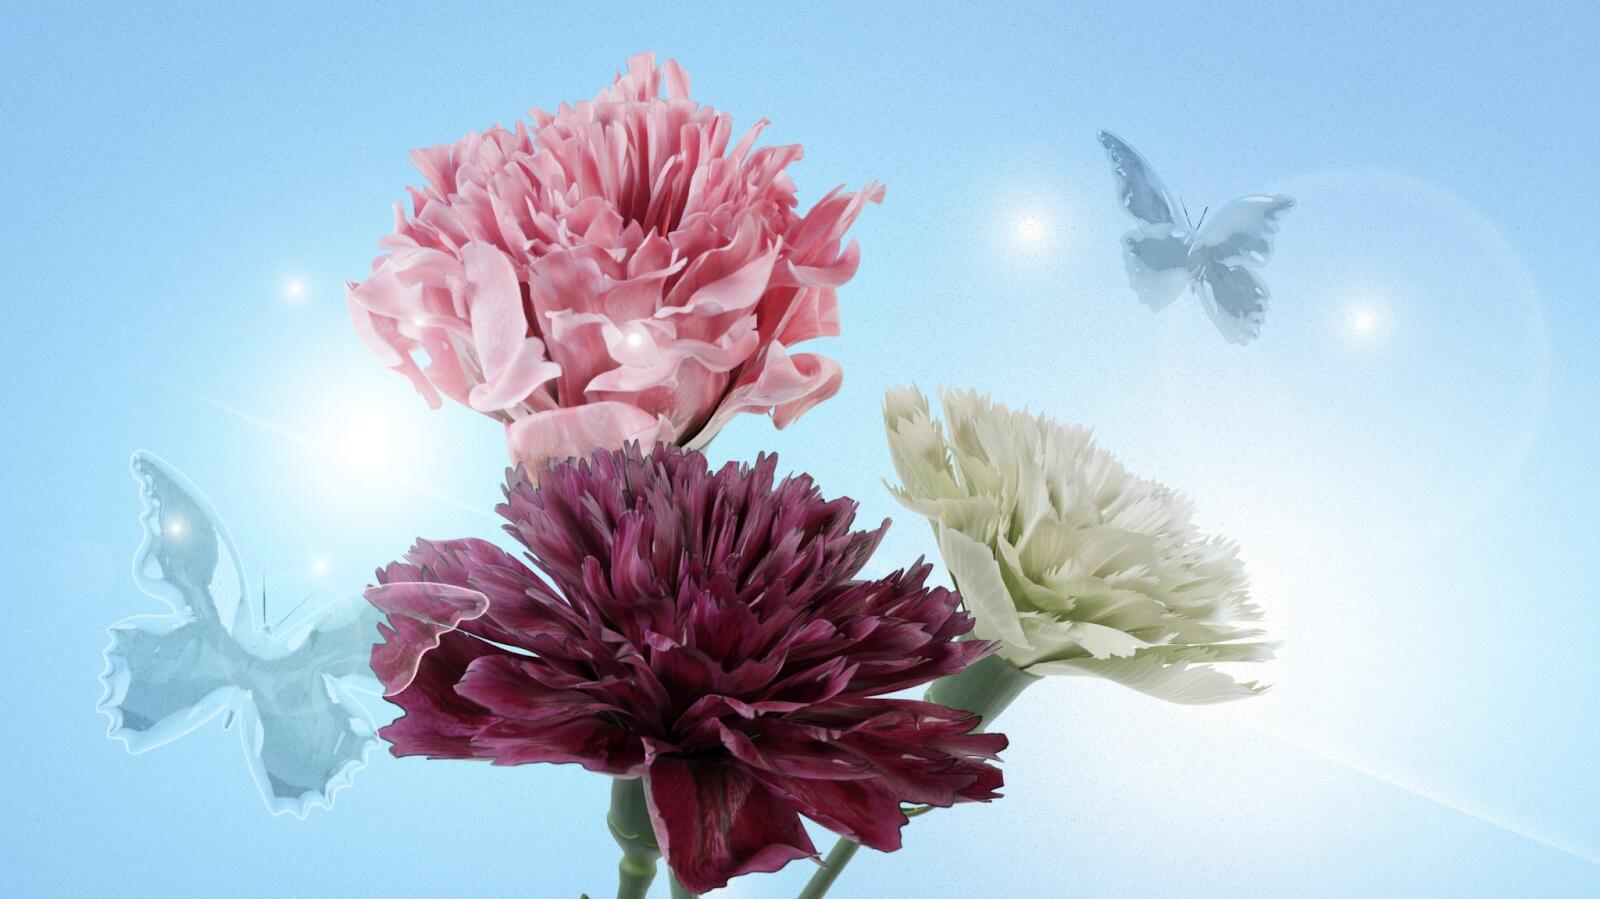 Carnation Flower Meanings and Colour Symbolism